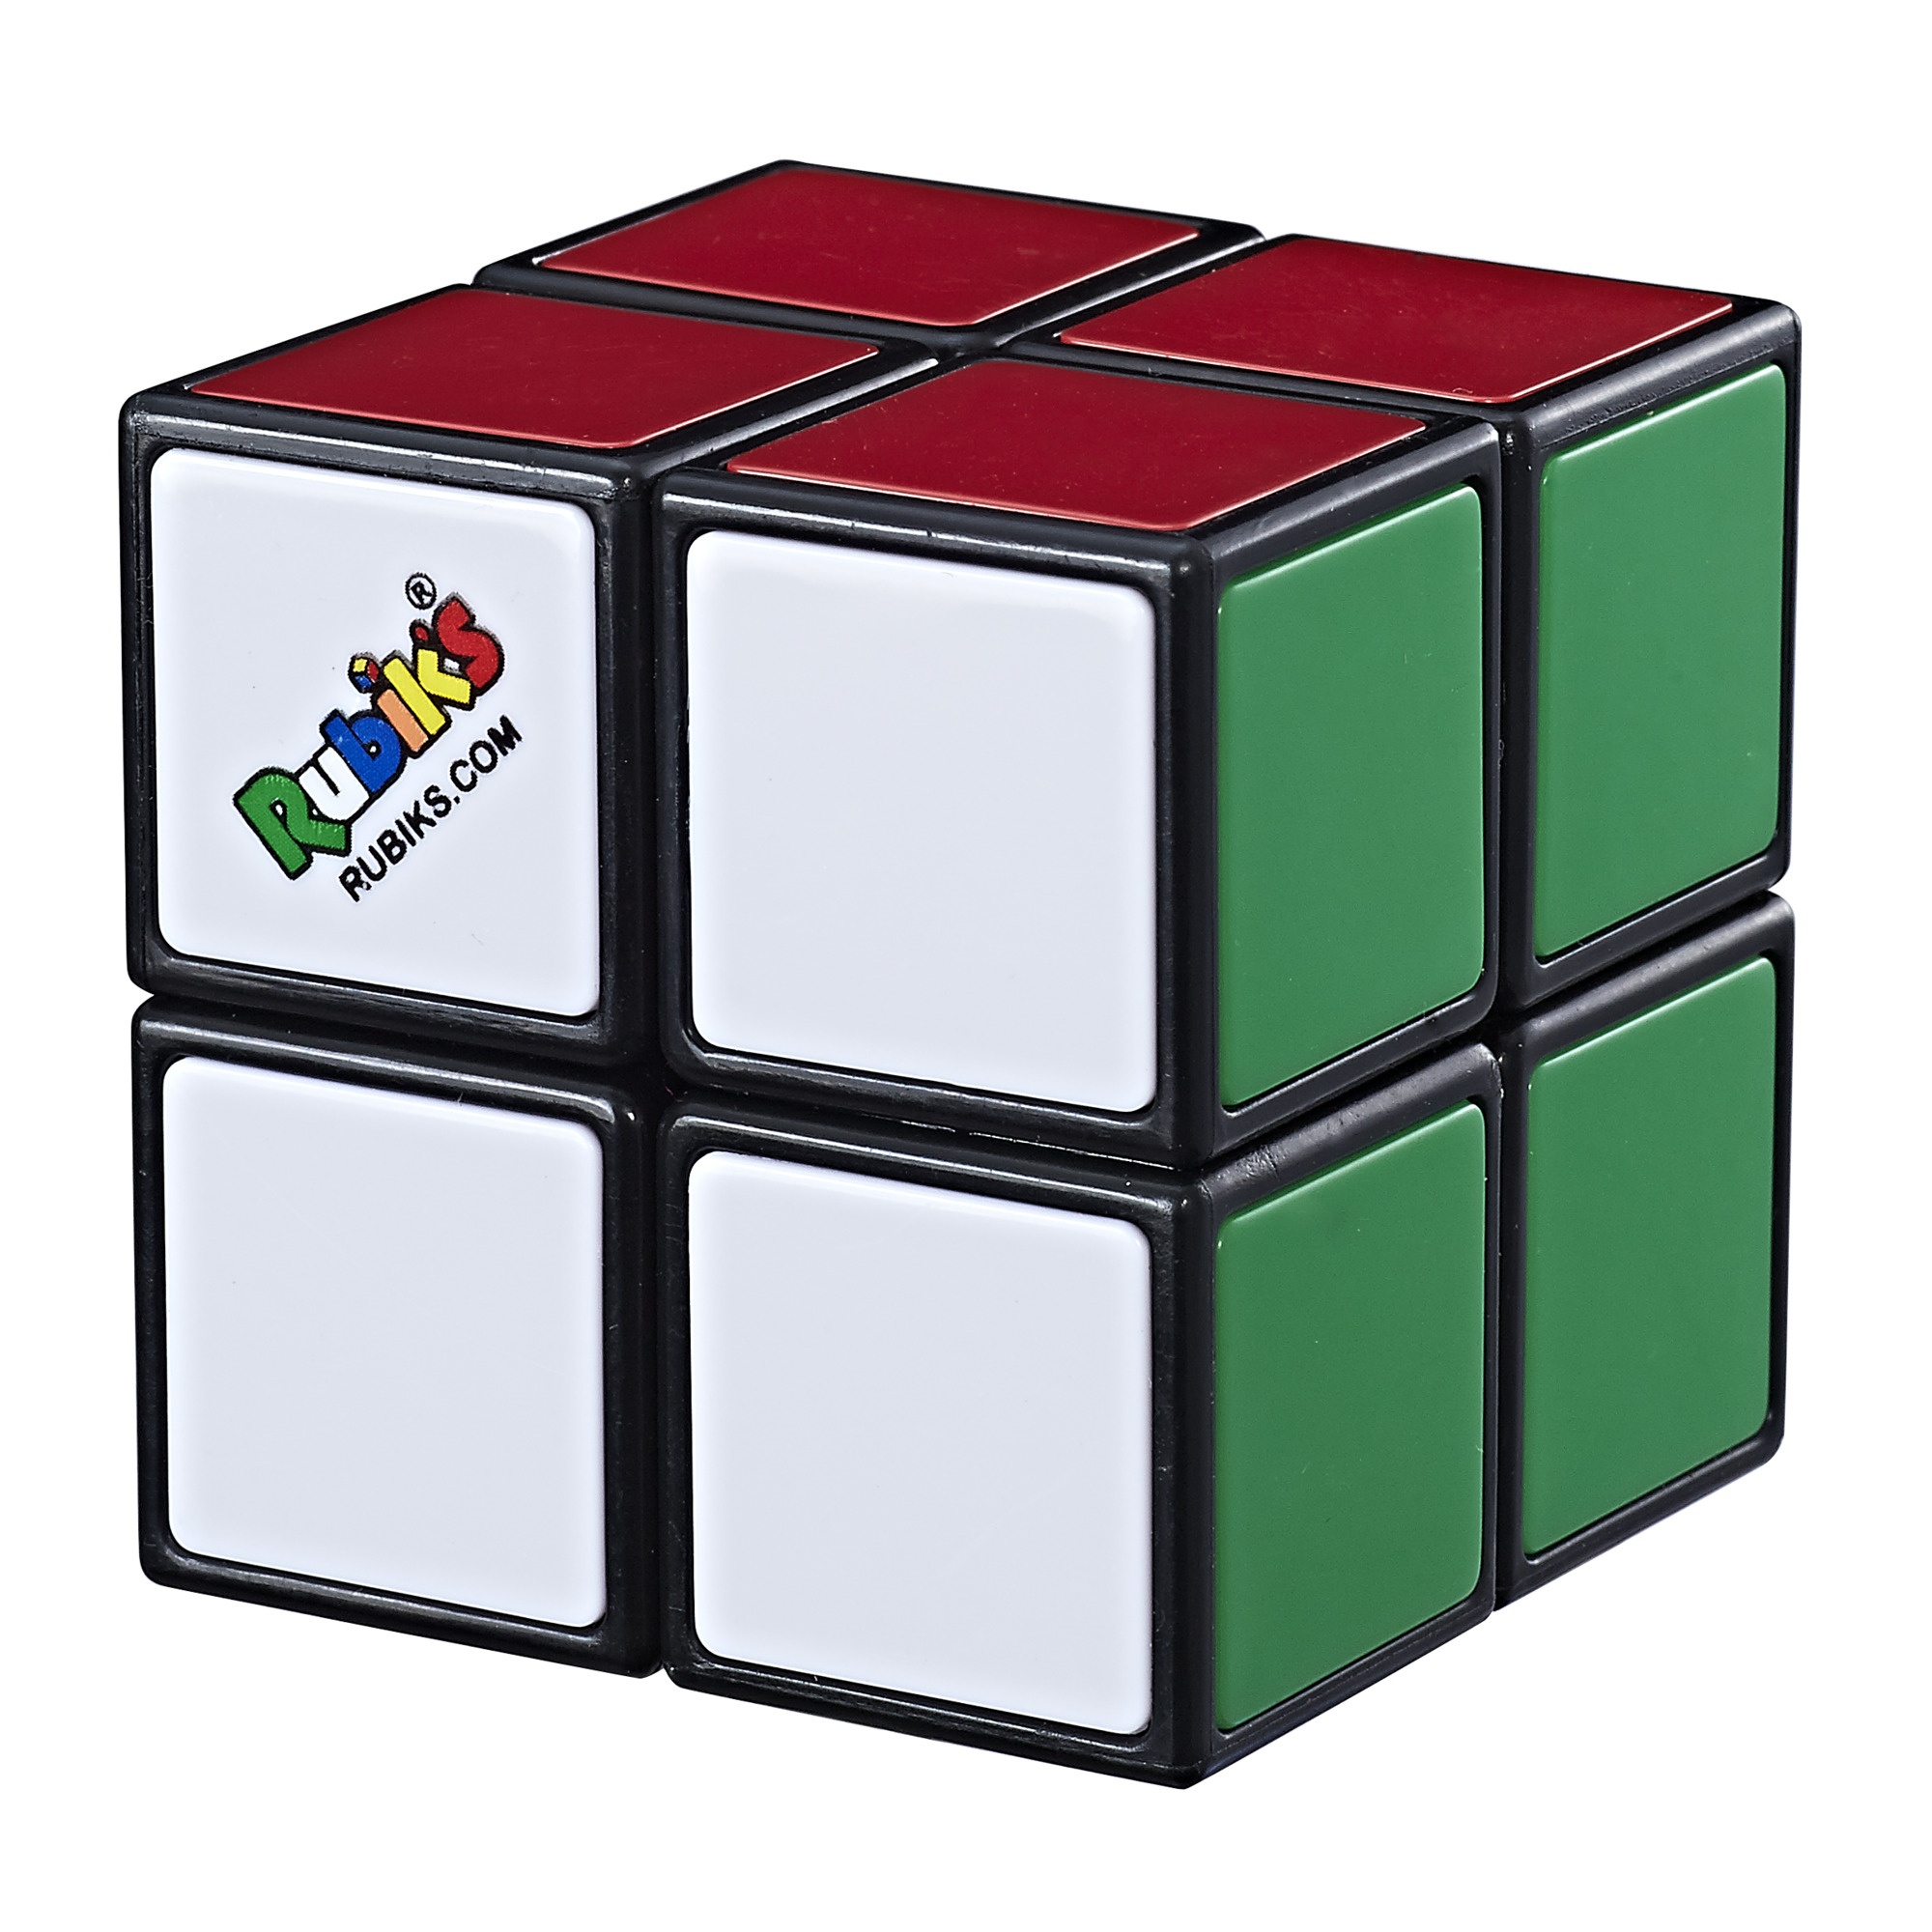 Rubik's Cube 2 x 2 Mini Puzzle Toy for Kids Ages 8 and Up - image 5 of 10